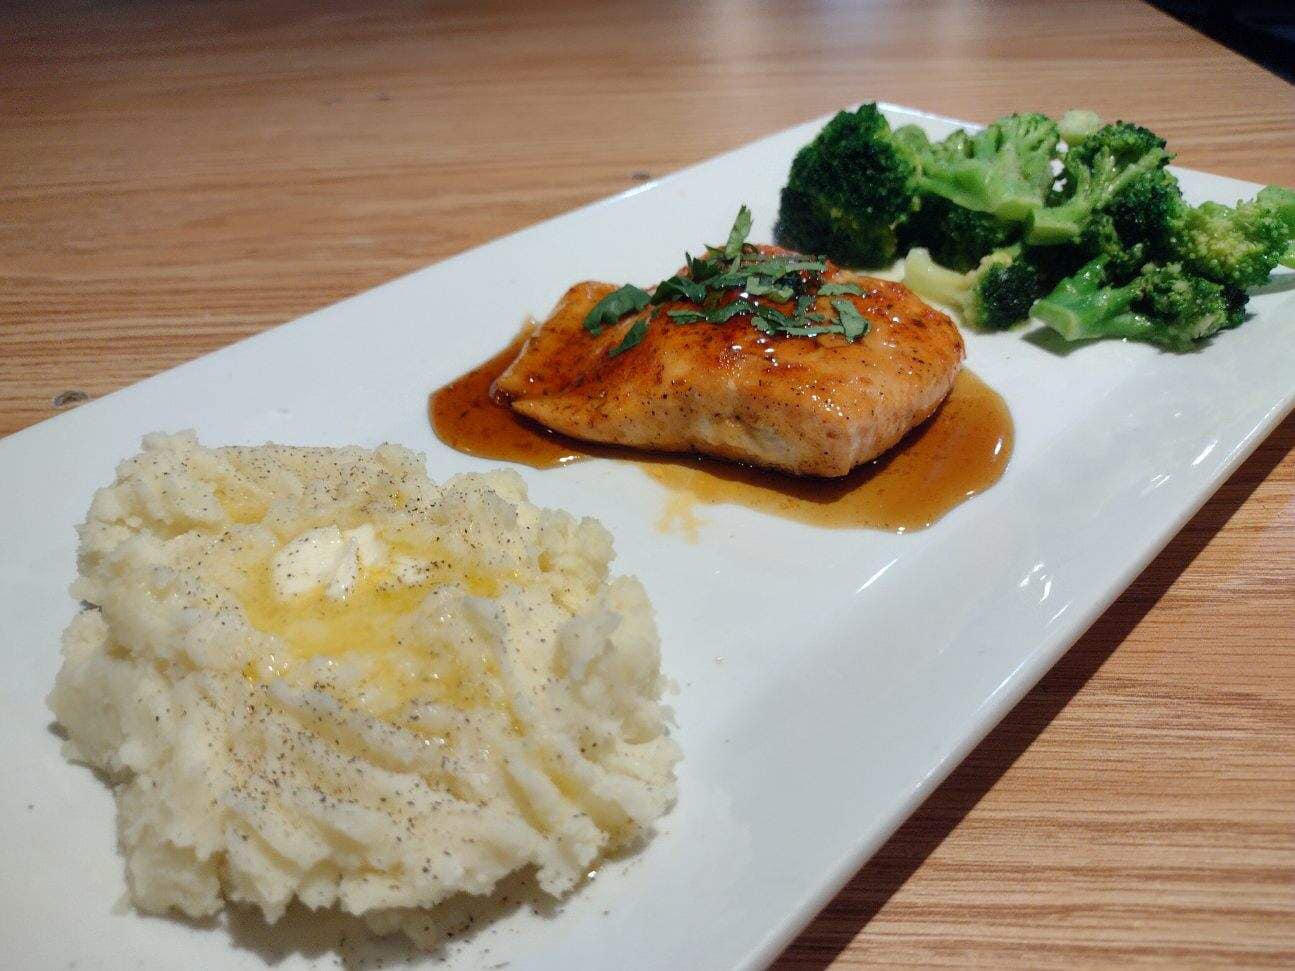 a plate of salmon, mashed potatoes, and broccoli